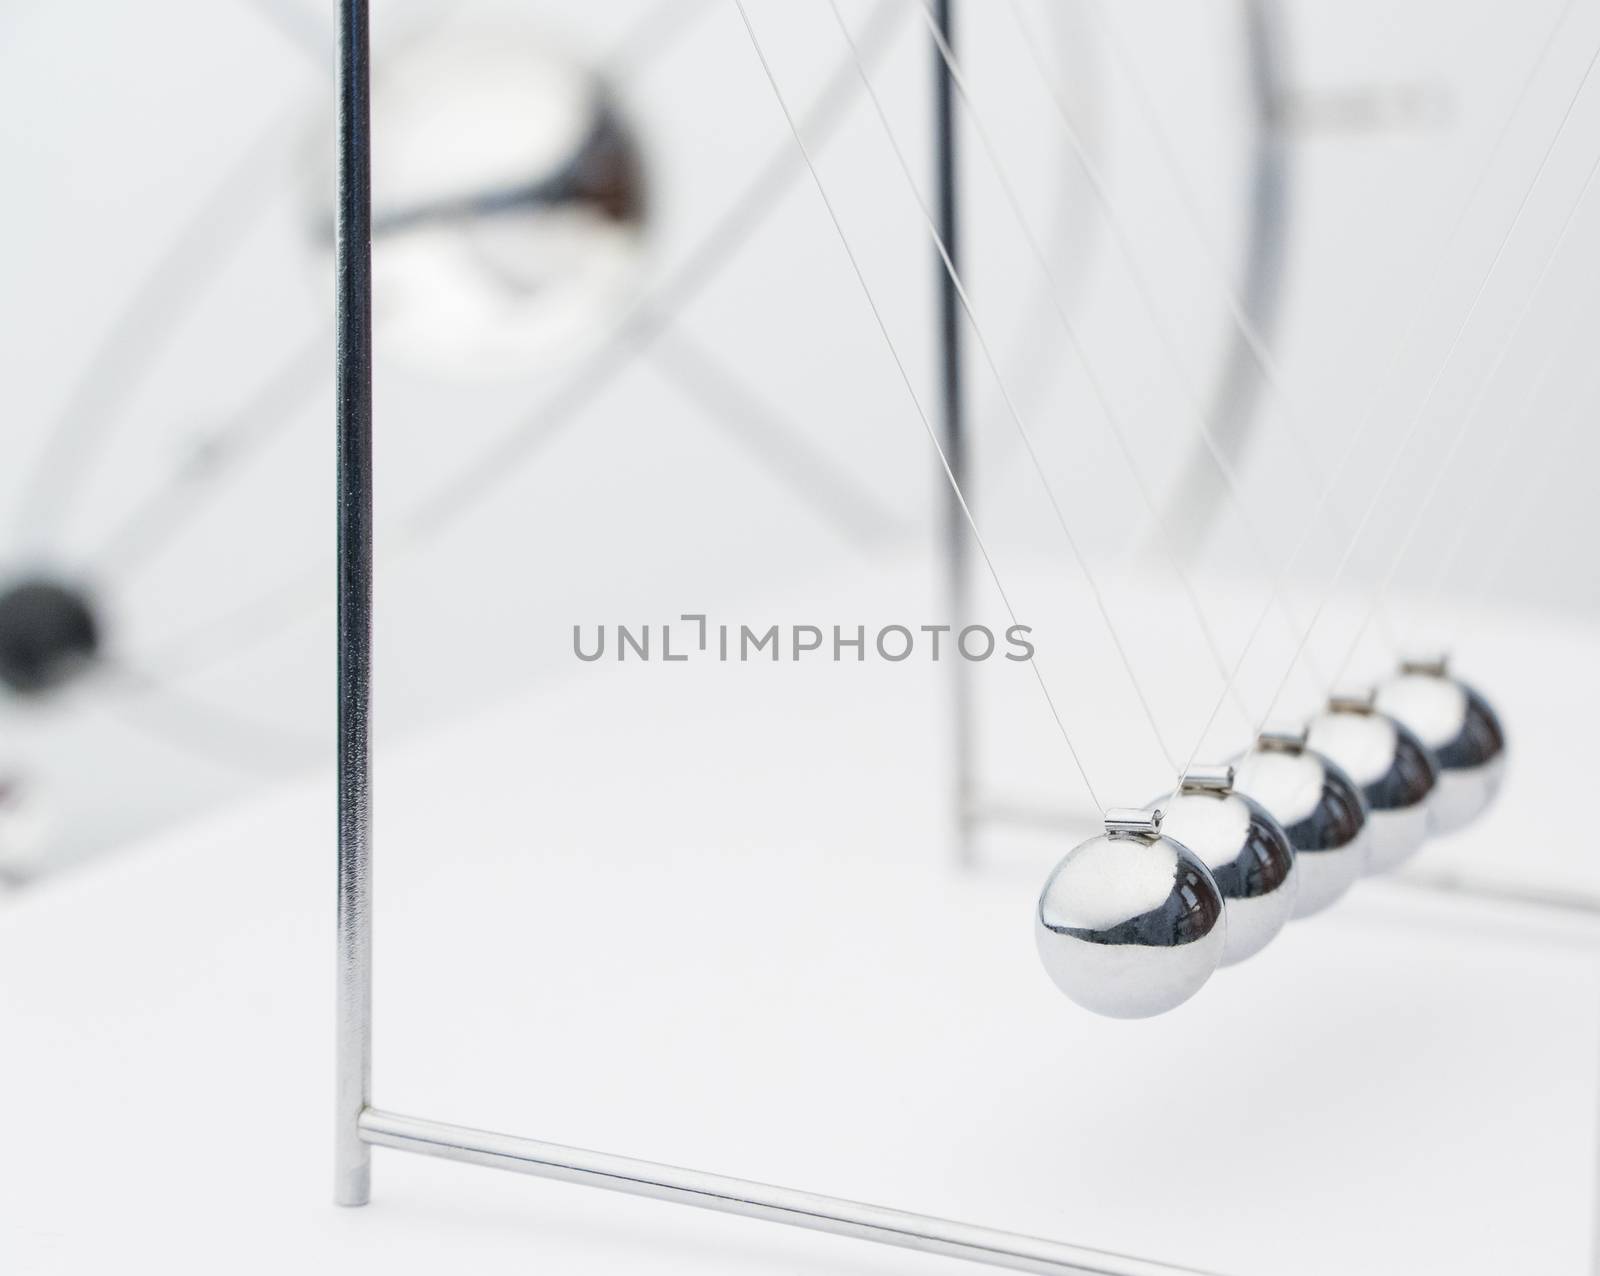 balancing balls on a white background. business concept. Newtons Cradle